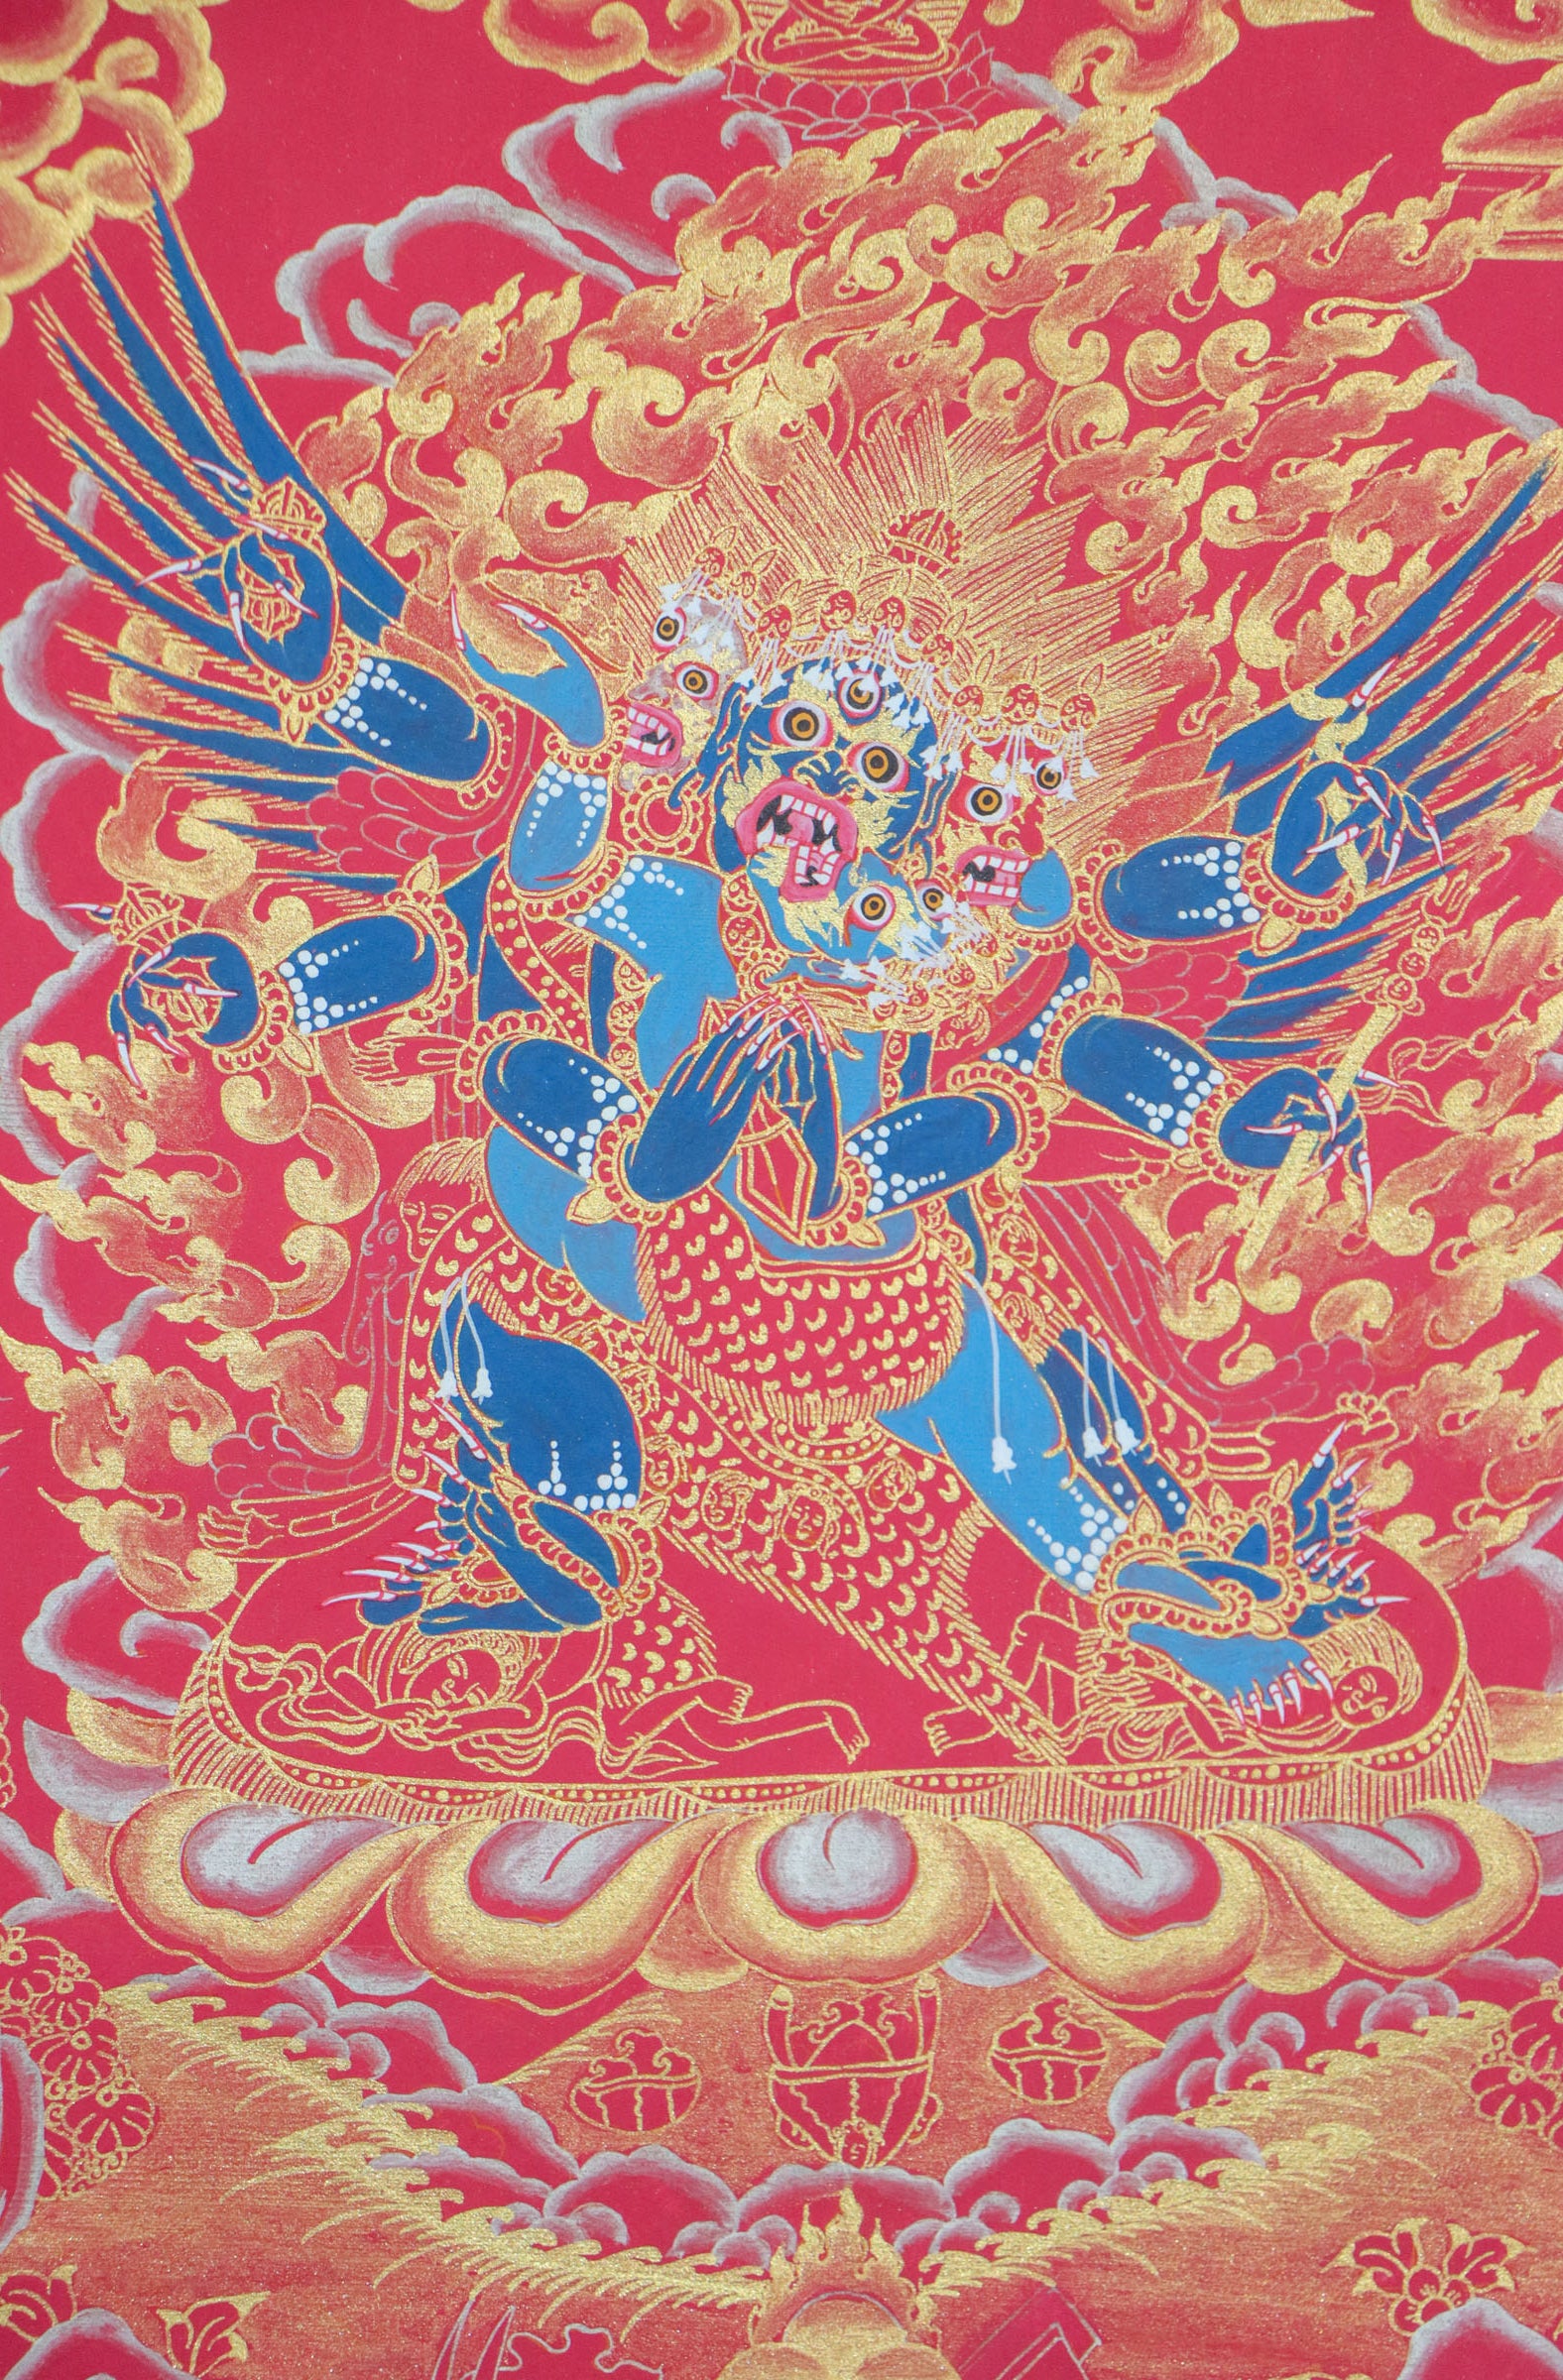 Vajrakilaya thangka symbolizes protection from obstacles, negative energies, and spiritual interference.